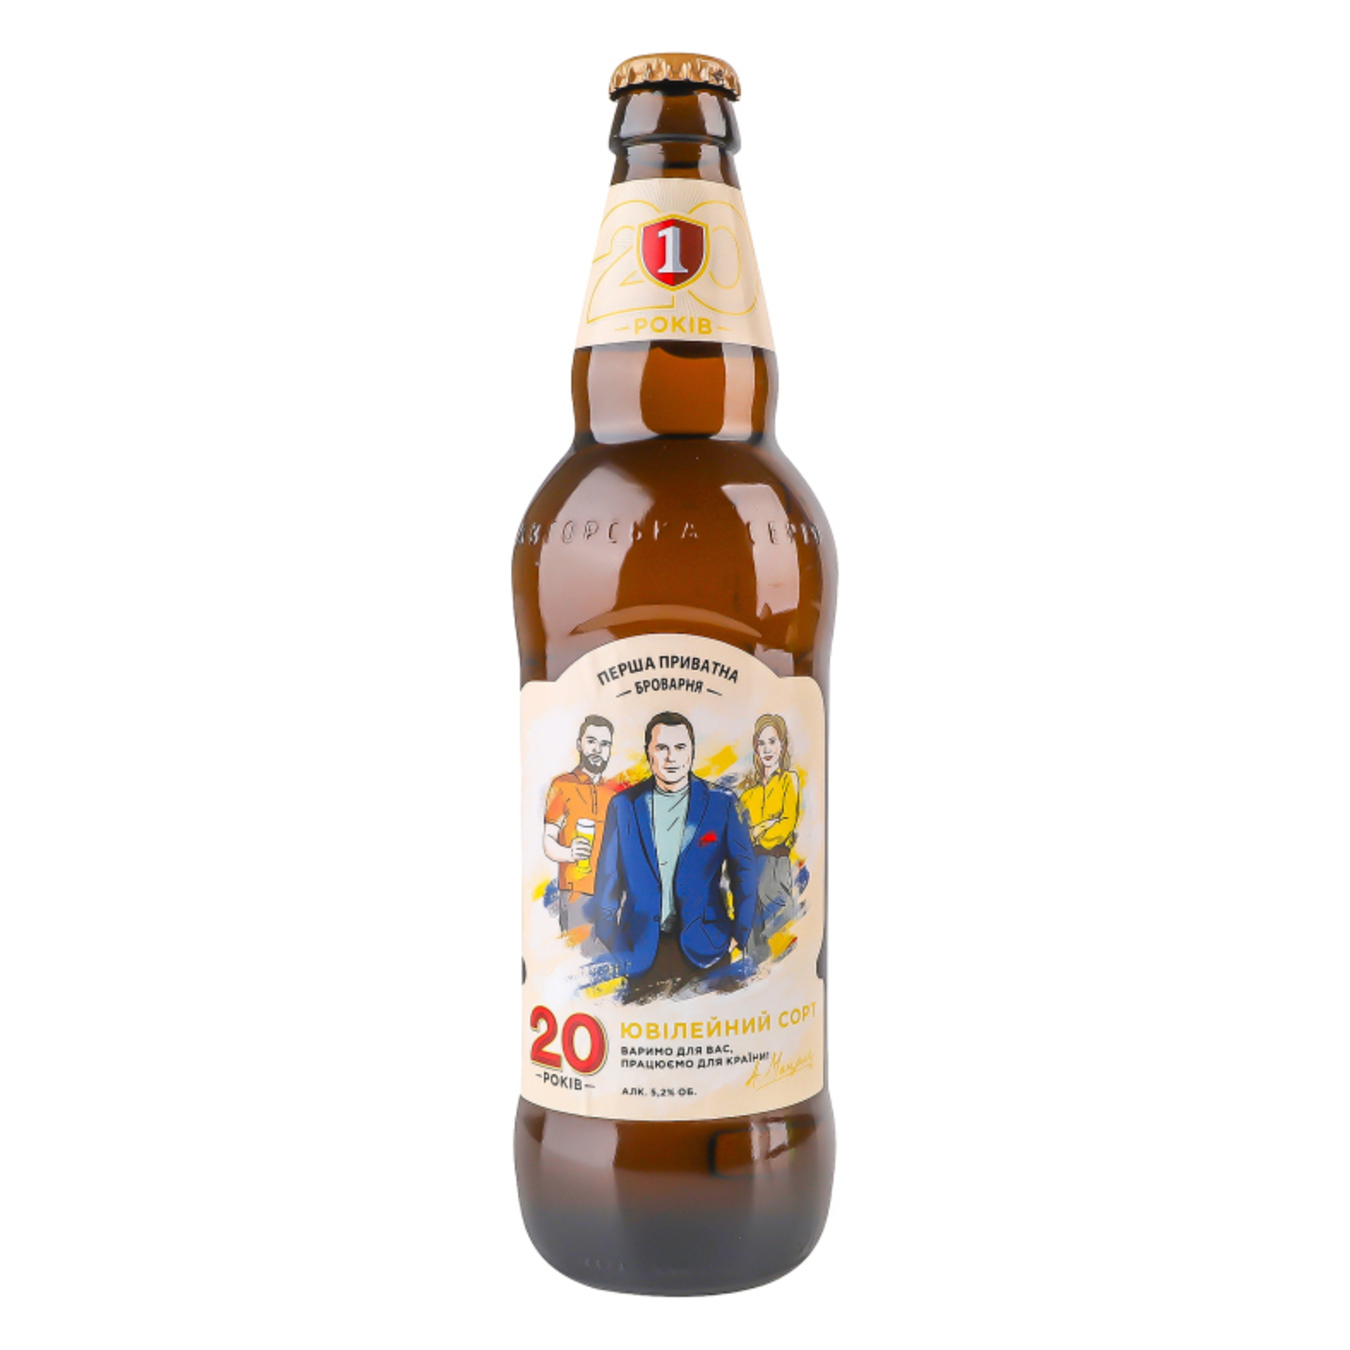 Light beer First Private Brewery 20 Years 5.2% 0.5l glass